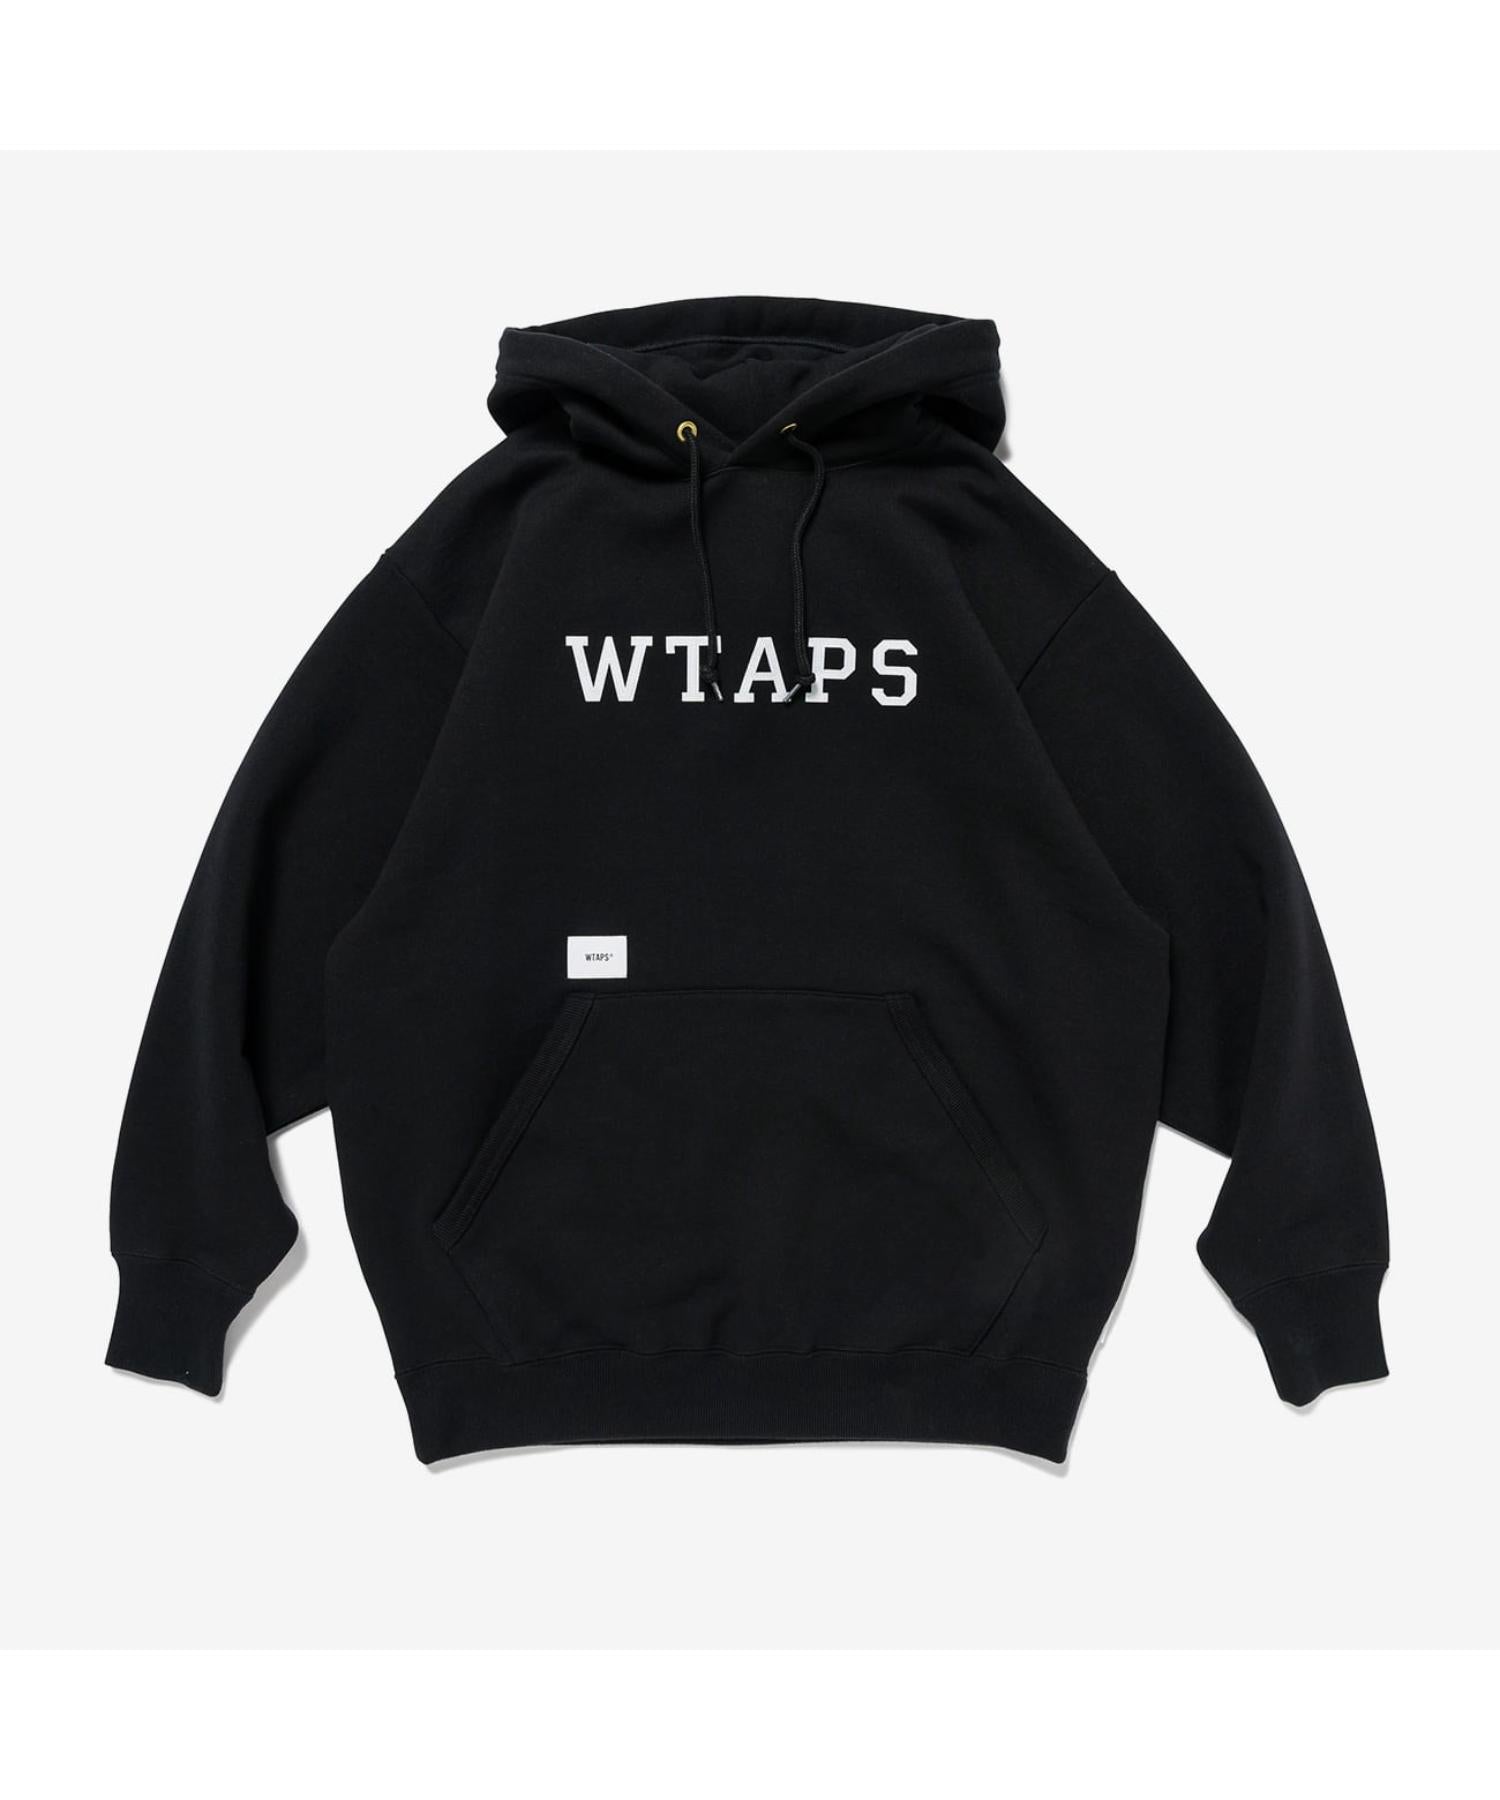 ACADEMY / HOODY / COTTON. COLLEGE - WTAPS (ダブルタップス) - tops 